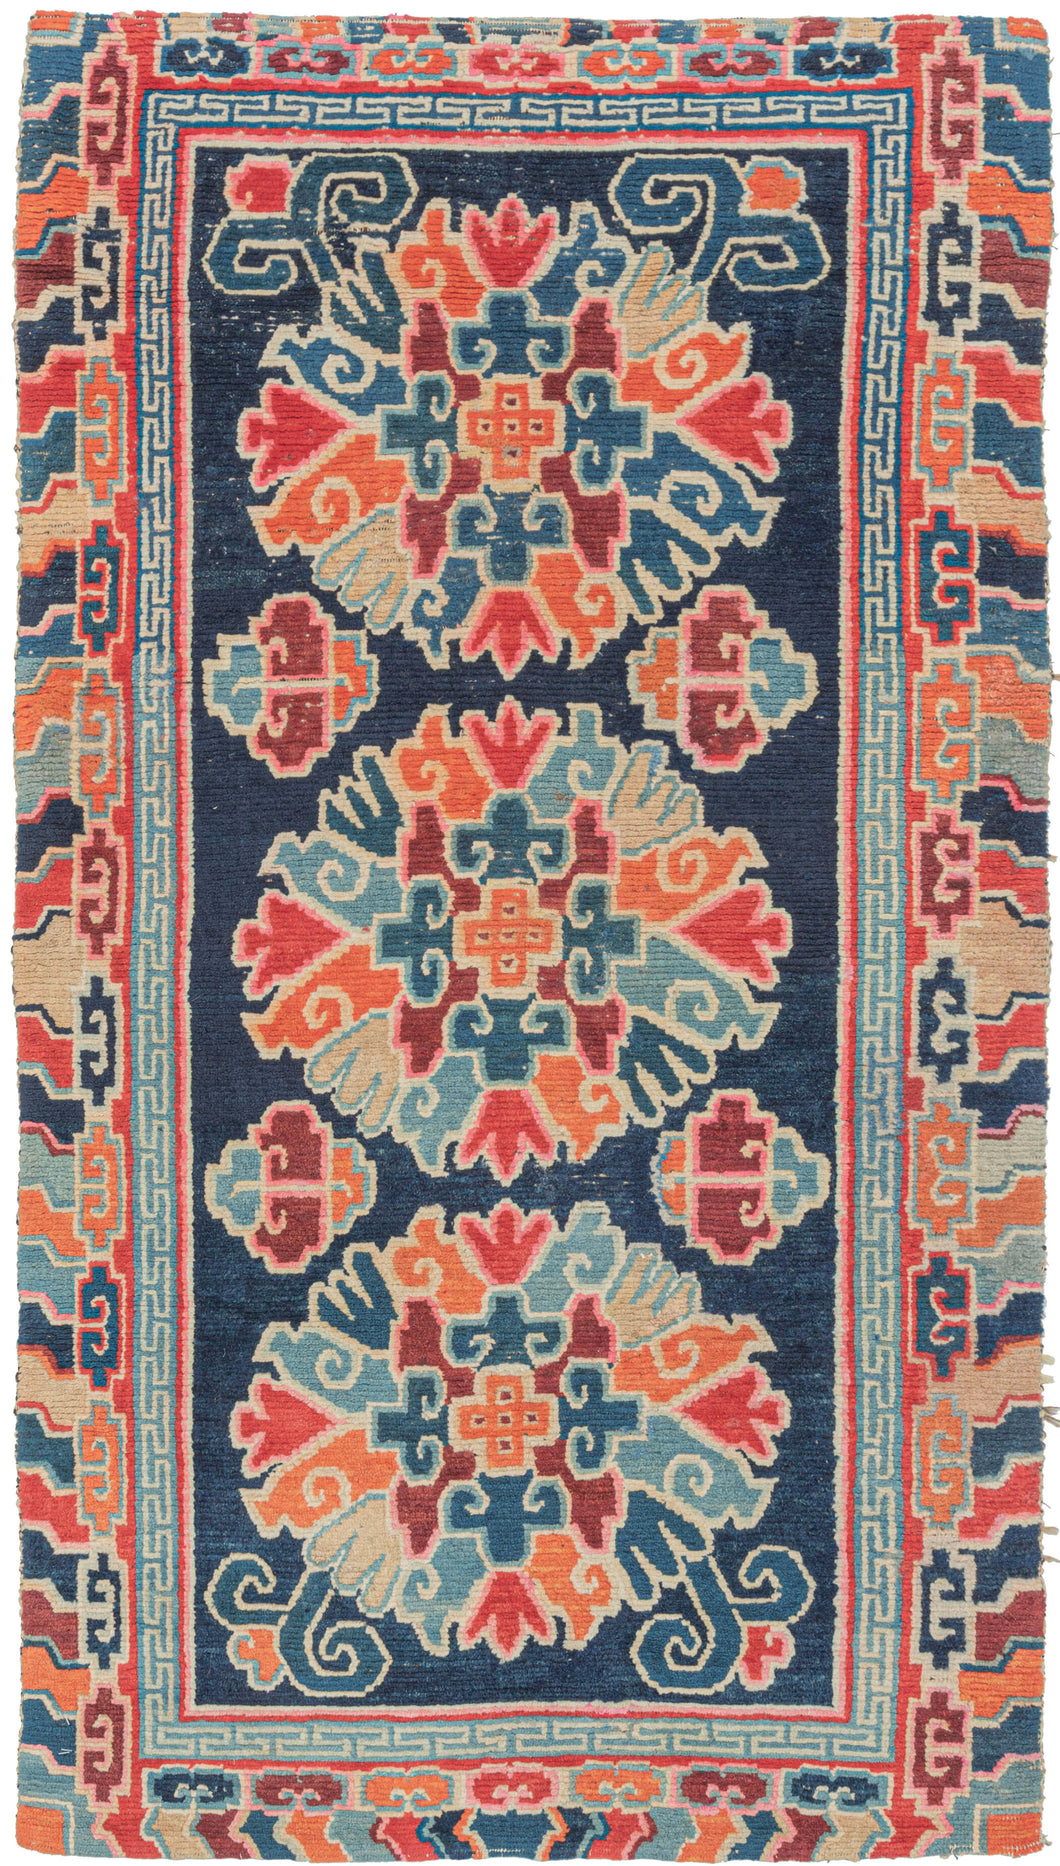 This Khaden was handwoven in Tibet during the early 20th century.   It features a three large lotus palmettes in vibrant tones of blues, reds, orange, pink and yellow and ivory on deep navy ground. With an inner minor border composed of a greek key motif and an exterior major border of energetic cloudbands. The format and design suggest use as a 